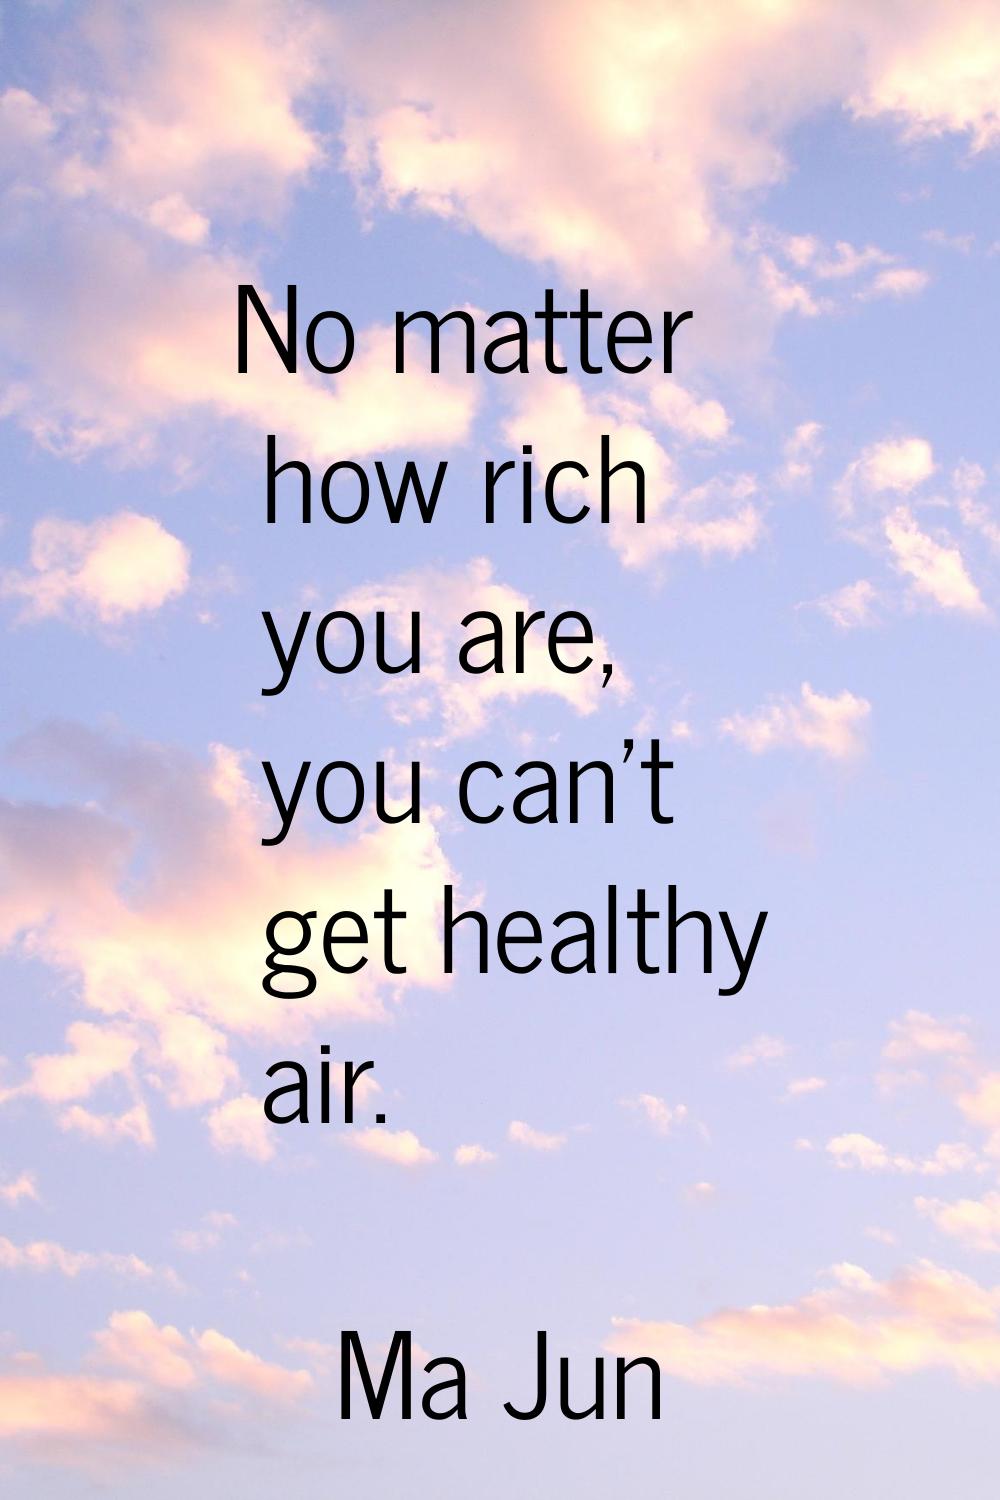 No matter how rich you are, you can't get healthy air.